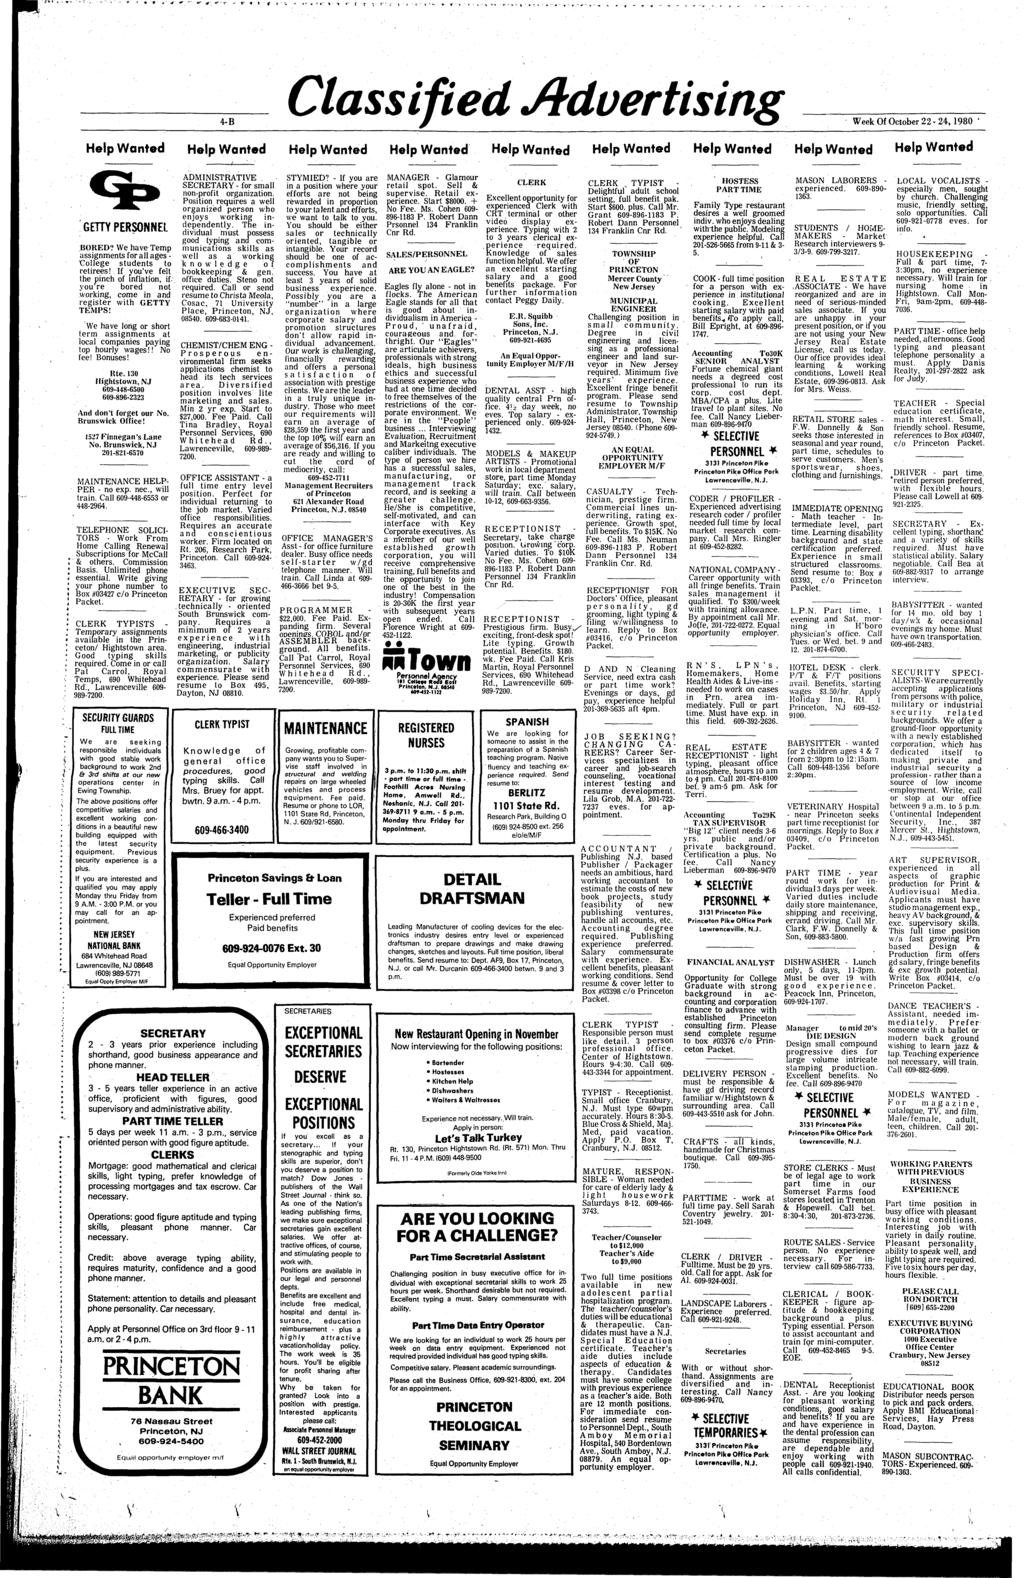 4-B Classified Advertising Week Of October 22-24, 1980 Help Wanted Help Wanted Help Wanted Help Wanted Help Wanted Help Wanted Help Wanted Help Wanted Help Wanted ij- GETTY PERSONNEL BORED?